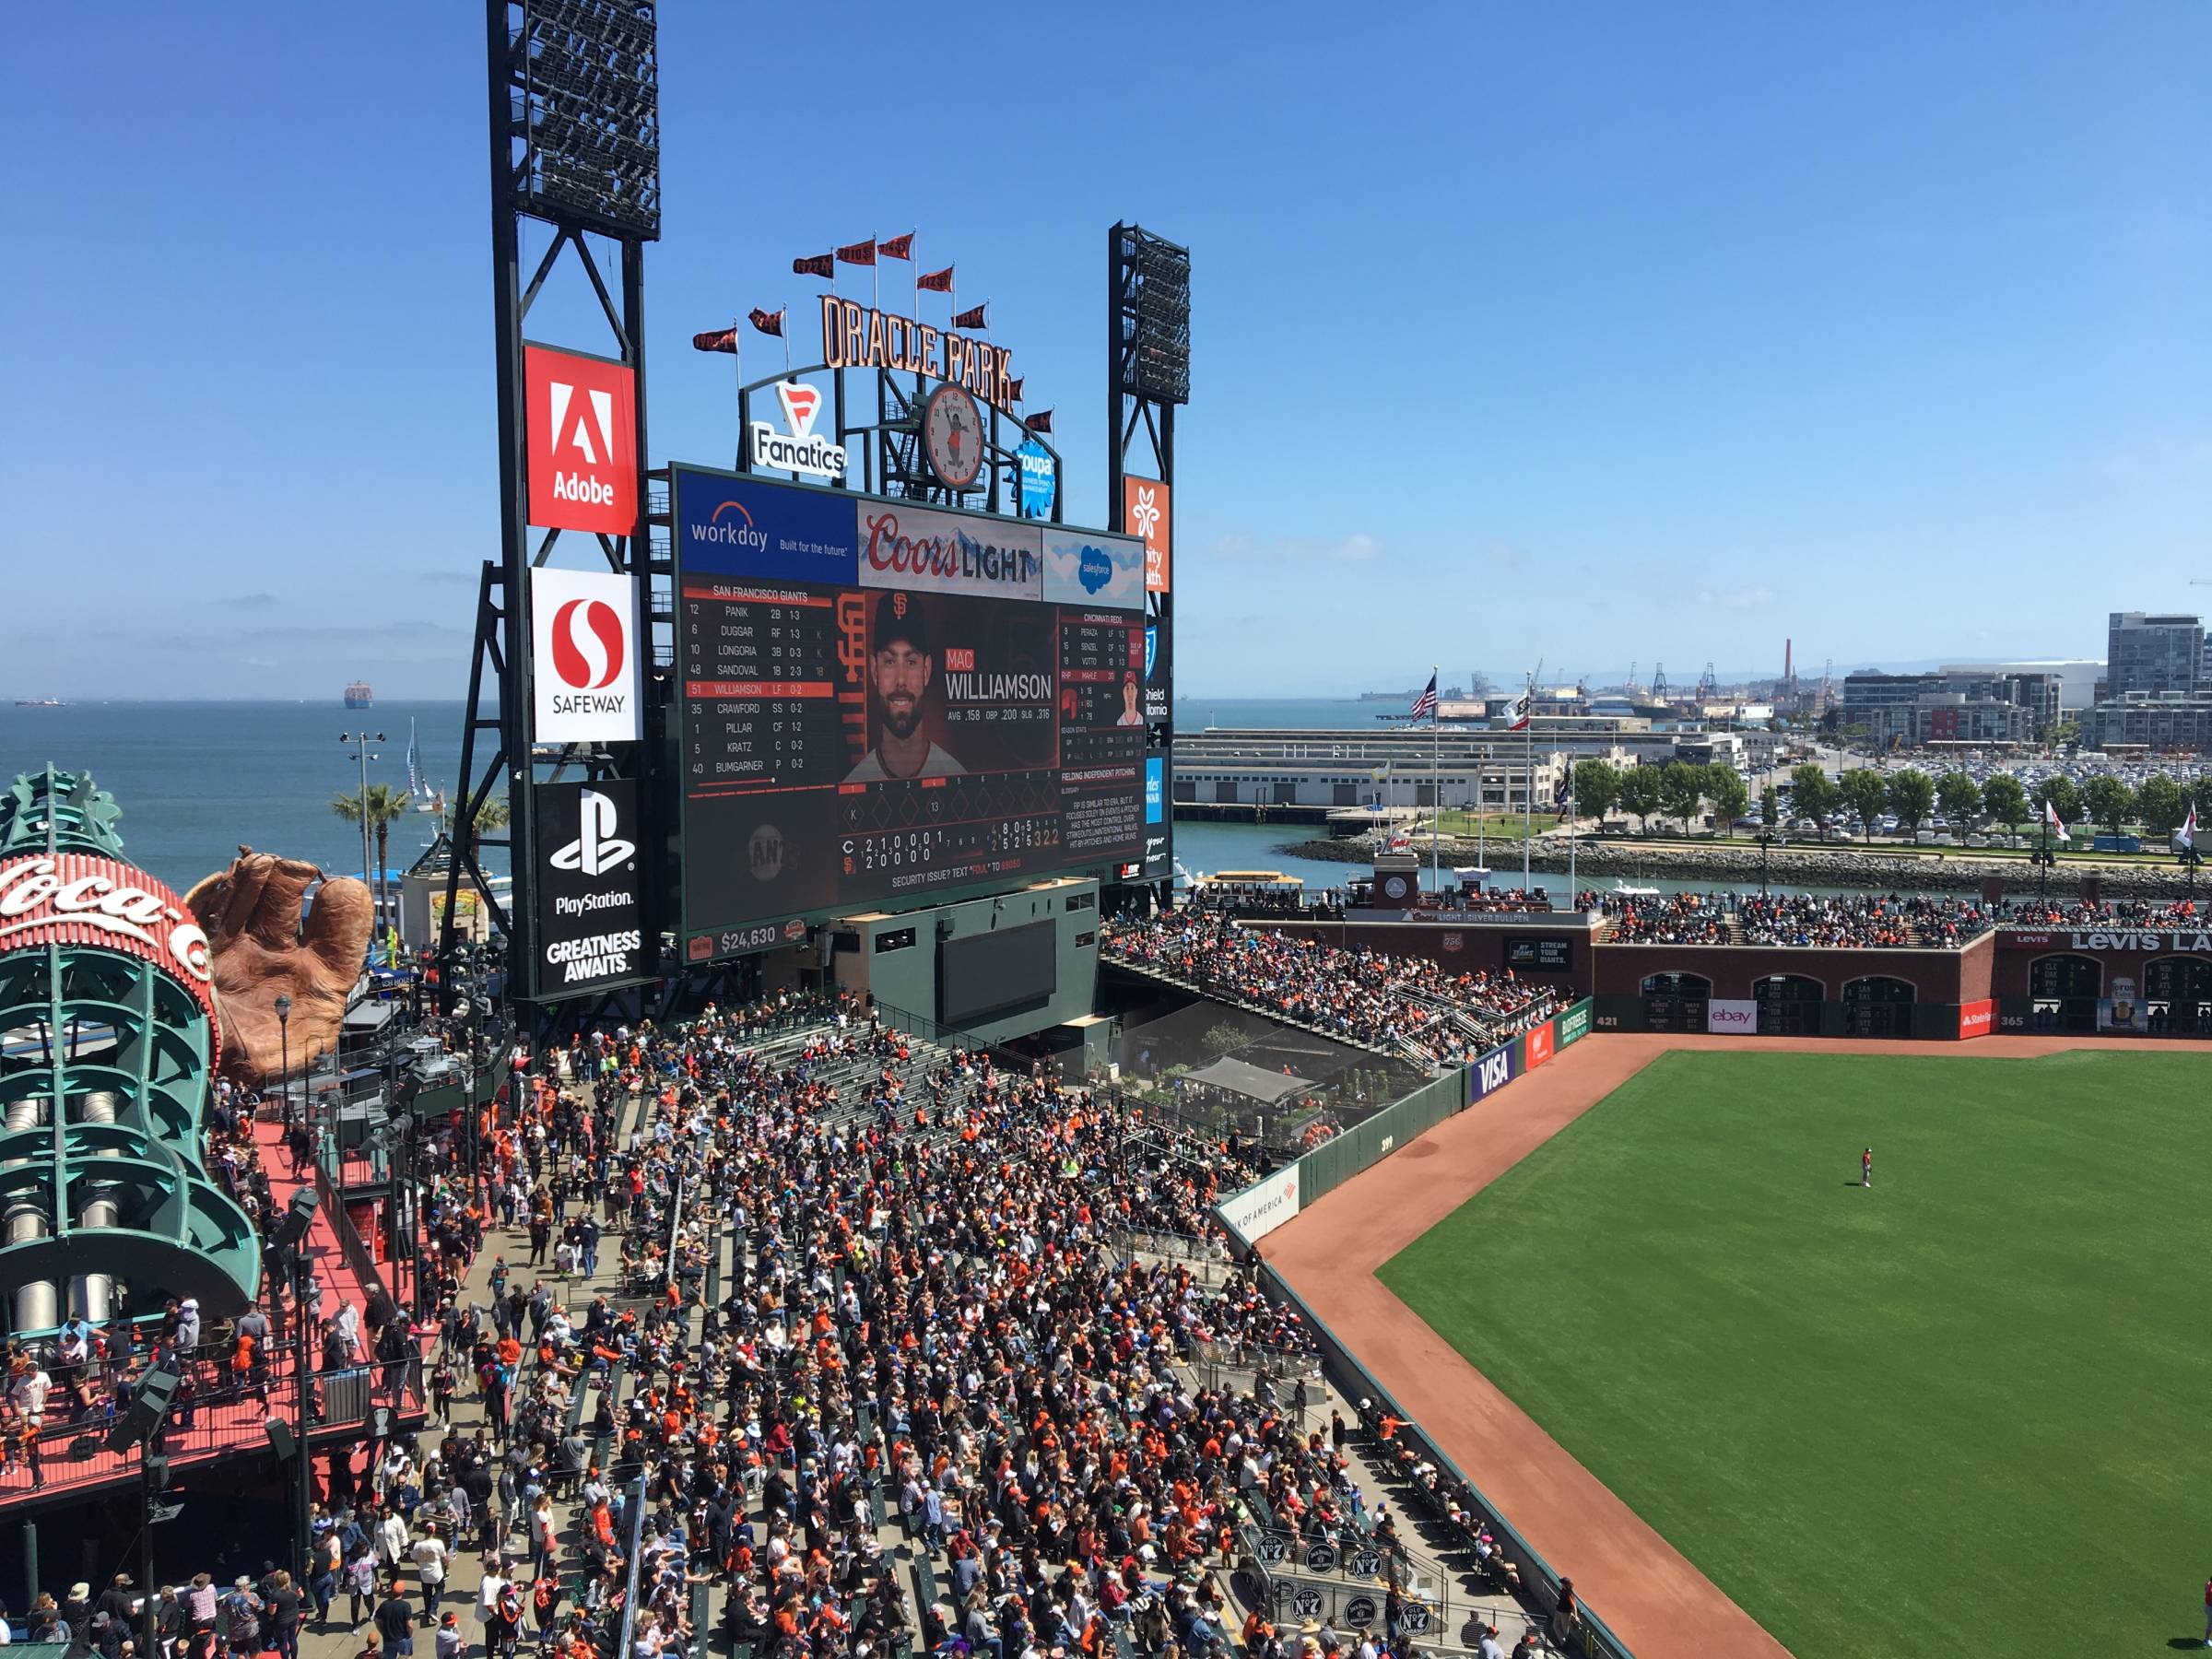 San Francisco Giants Stadium Items UPDATED - general for sale - by